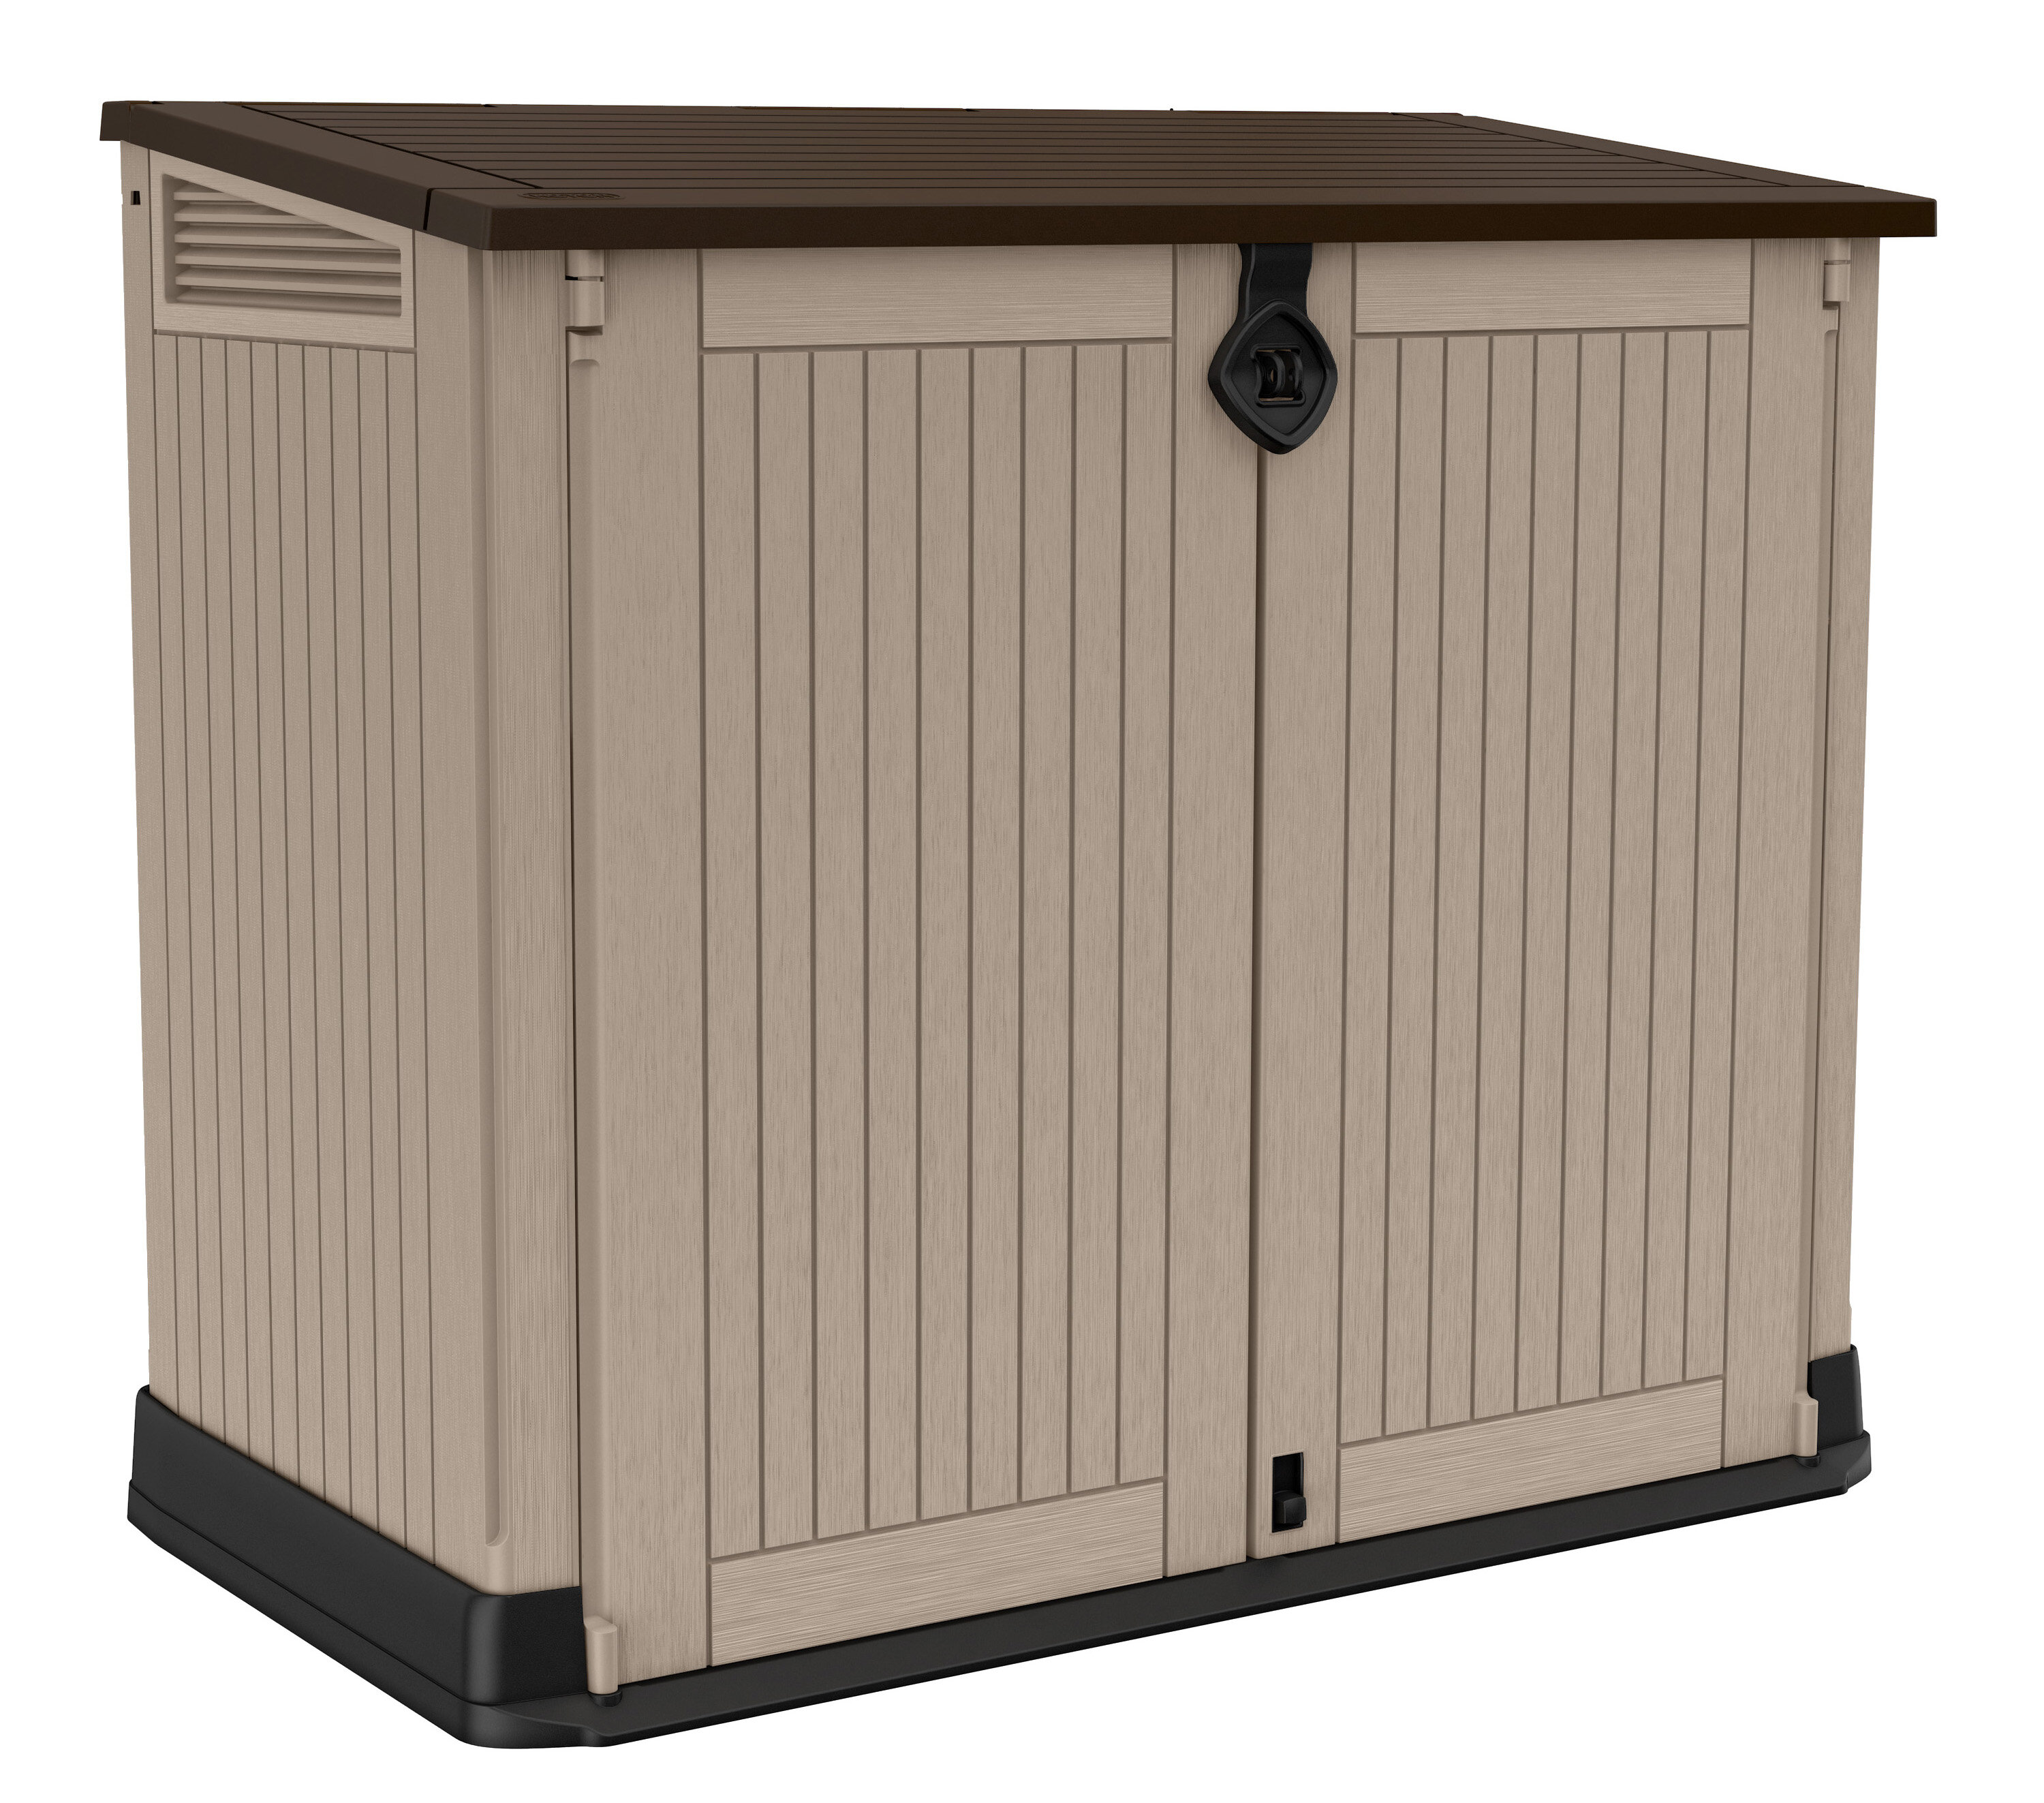 Keter - Sheds, Deck Boxes and More